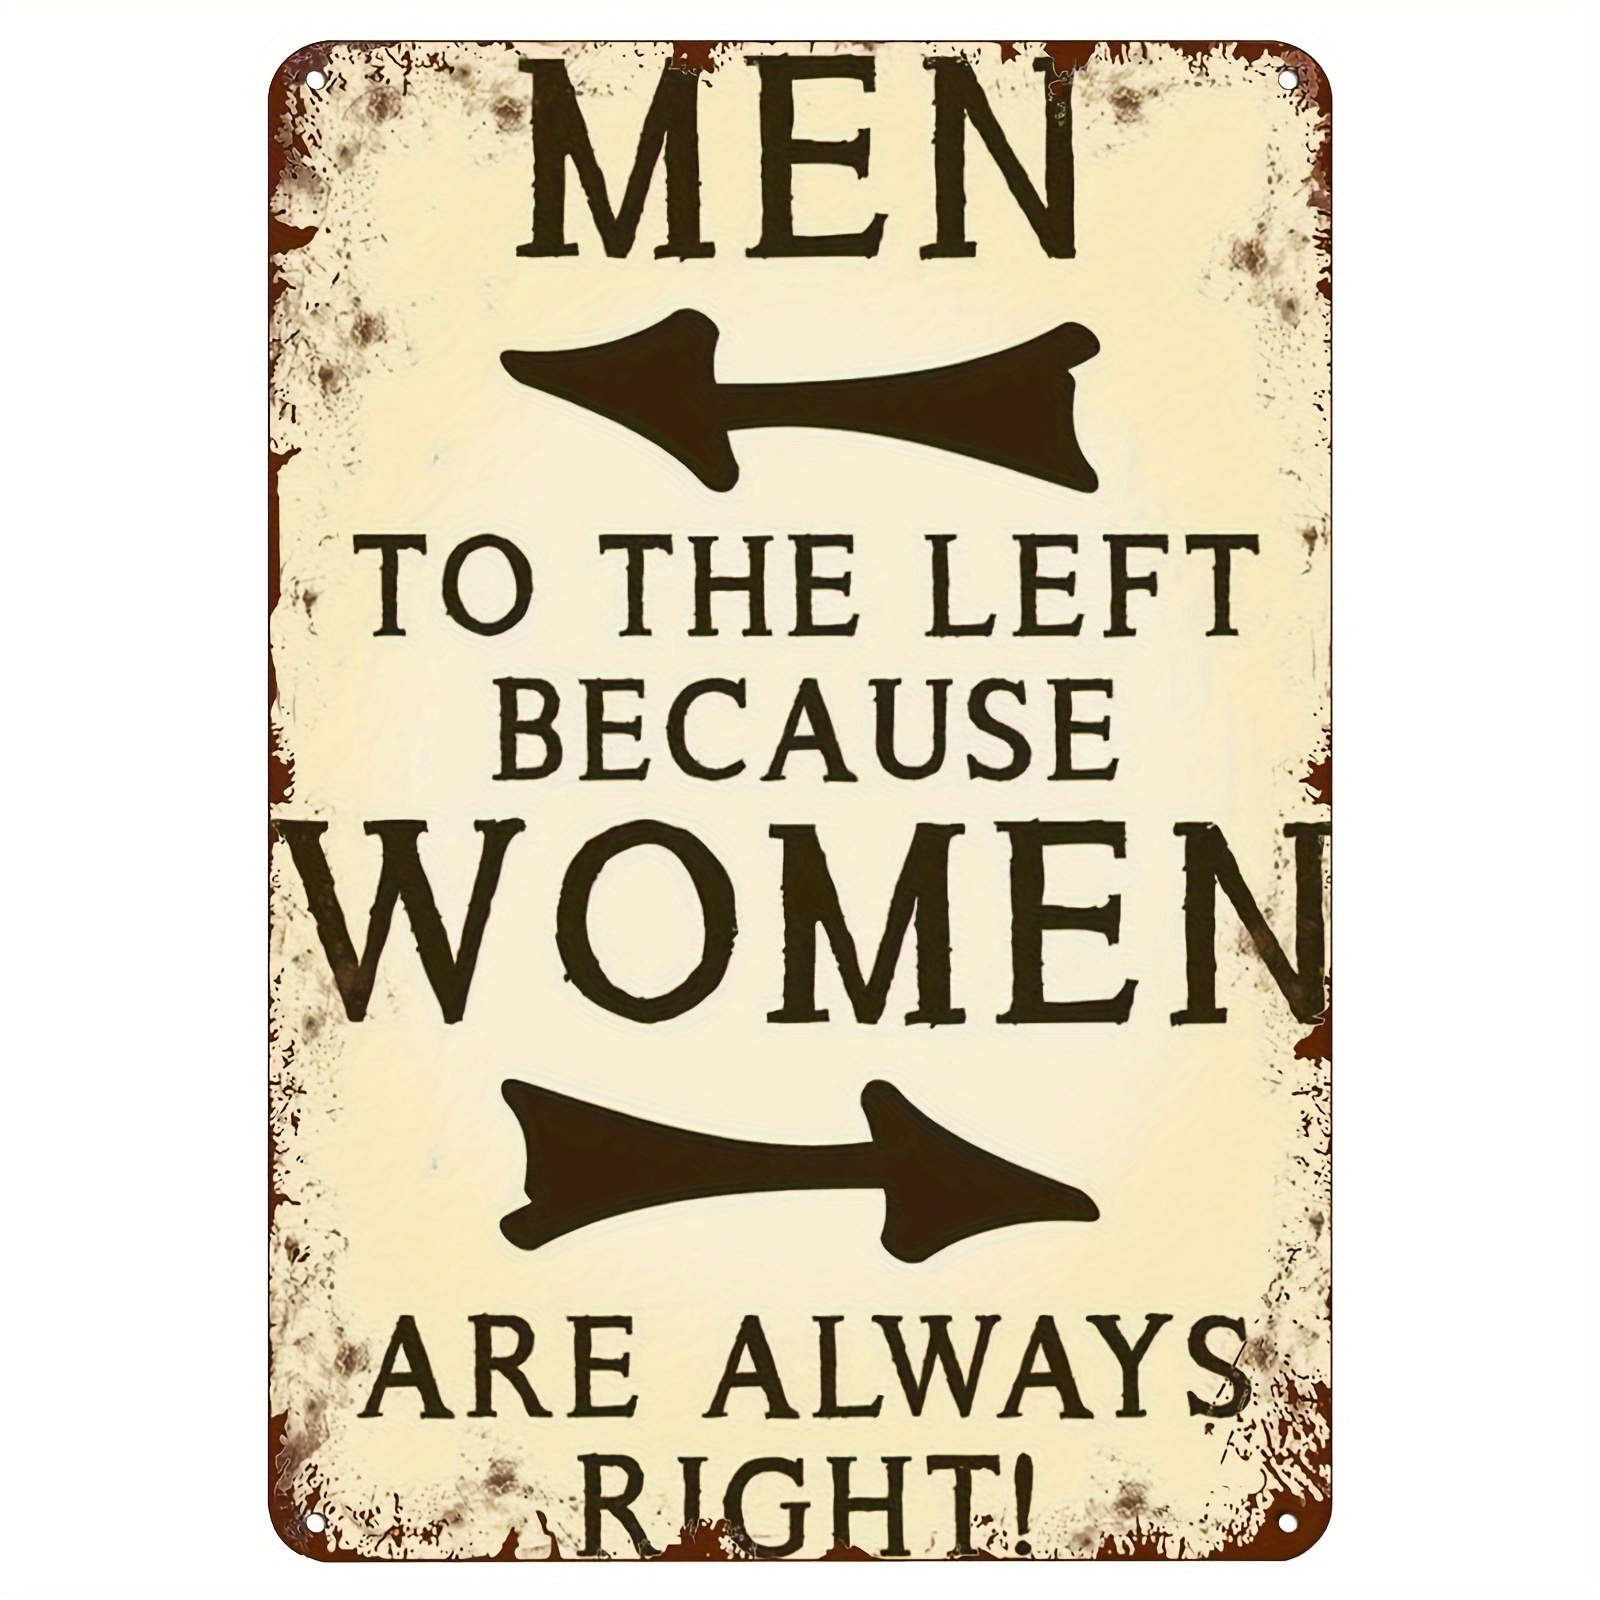 

Men To The Left Because Women Are Always Right Funny Metal Sign, Retro Wall Decor, Creative Tinplate, For Home Gate Garden Bars Restaurants Cafes Office Store Pubs Club, 8x12 Inches